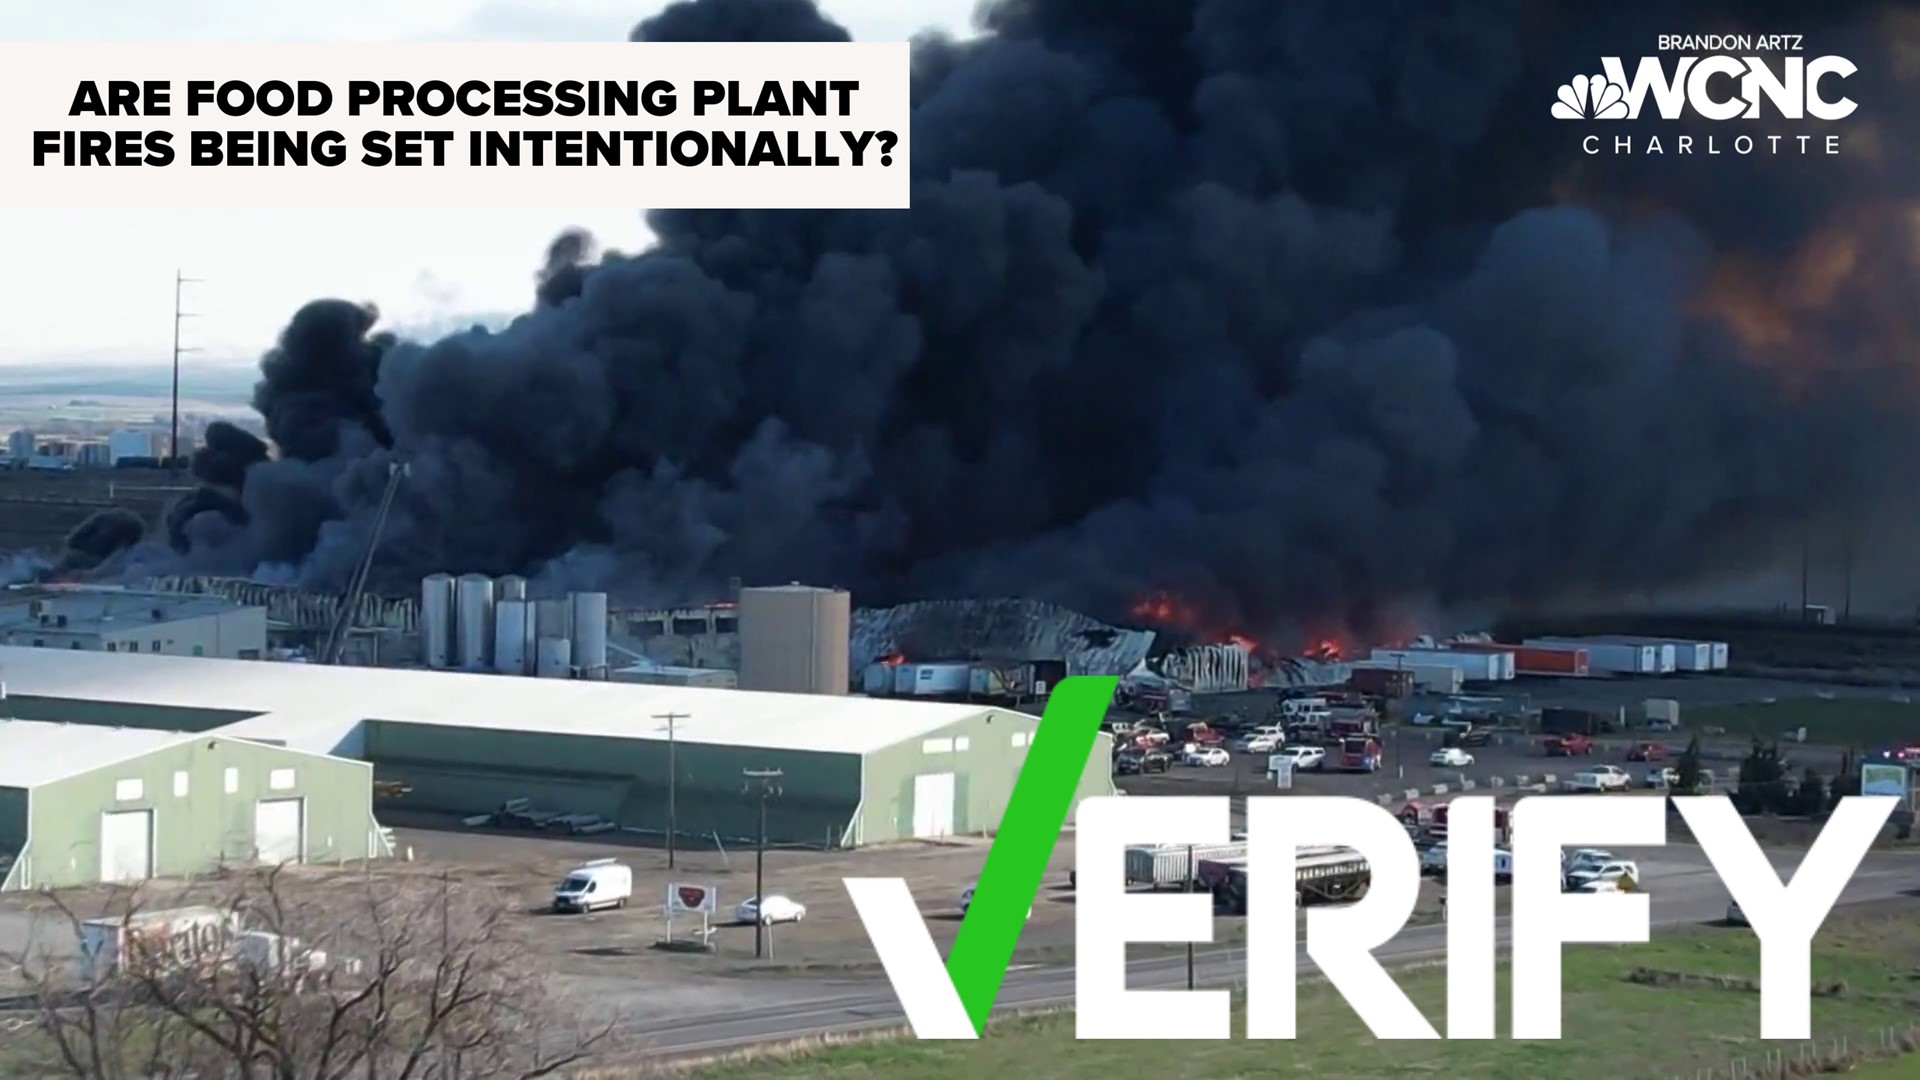 One of the latest claims we’ve seen all across social media relates to fires at food processing plants across the country. We verify if they're being set on purpose.